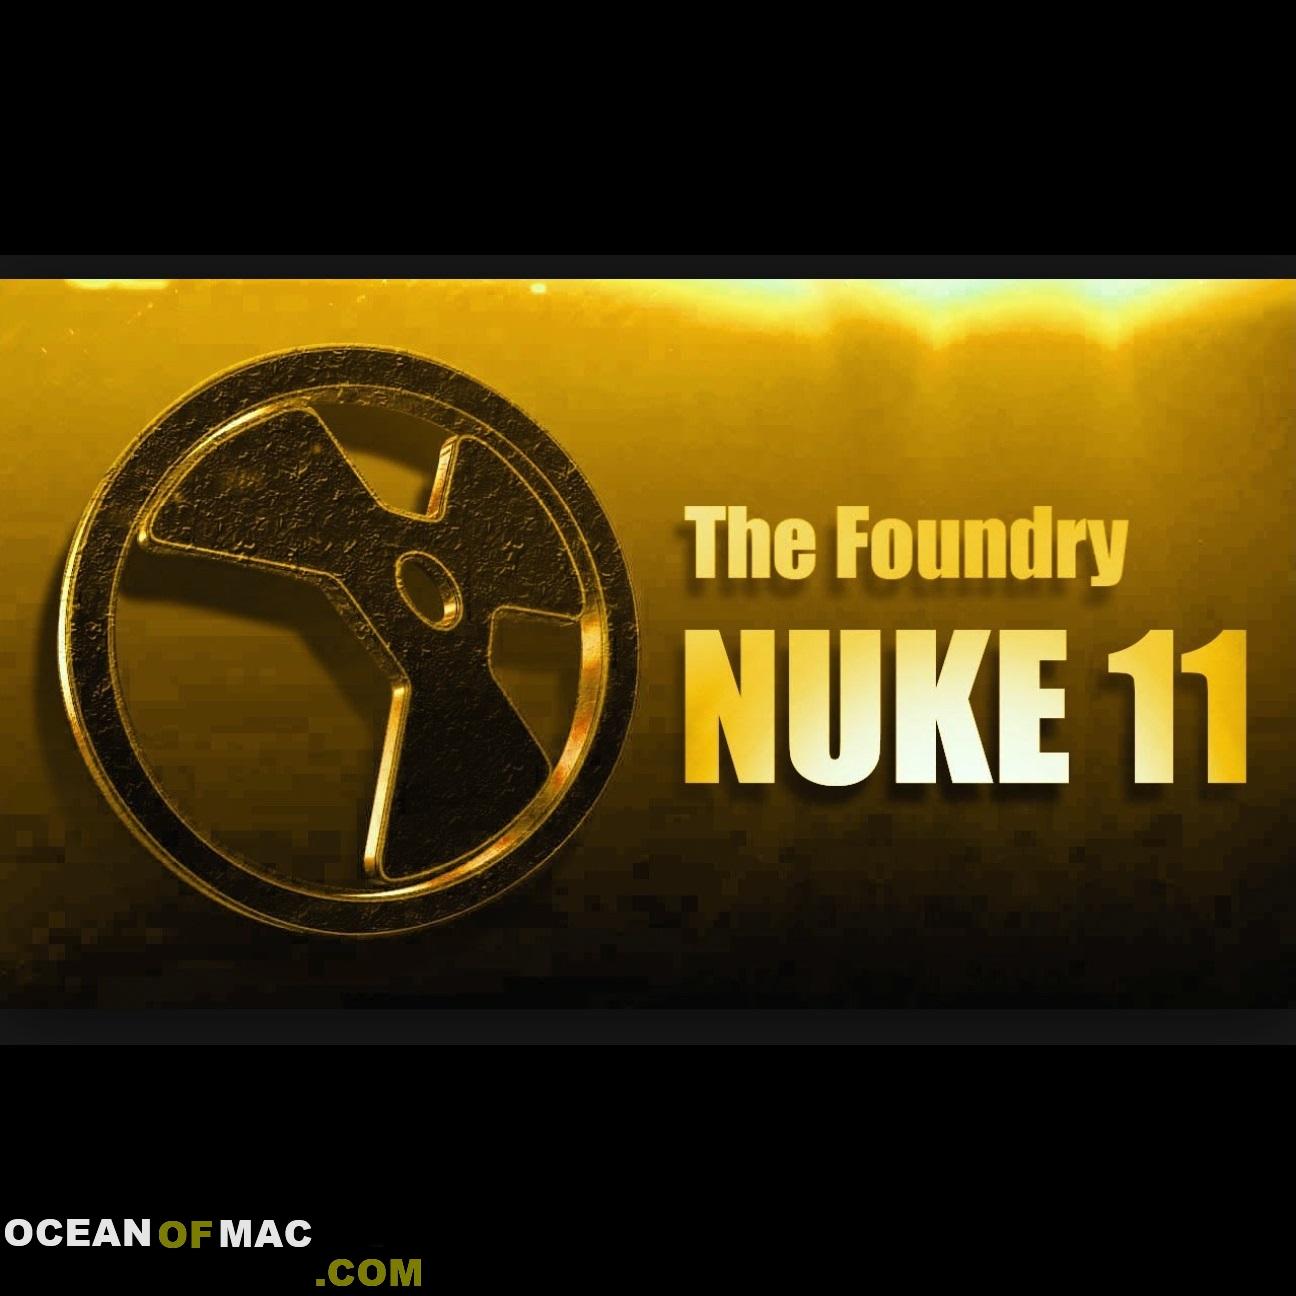 Download The Foundry Nuke 11.2 v4 for Mac